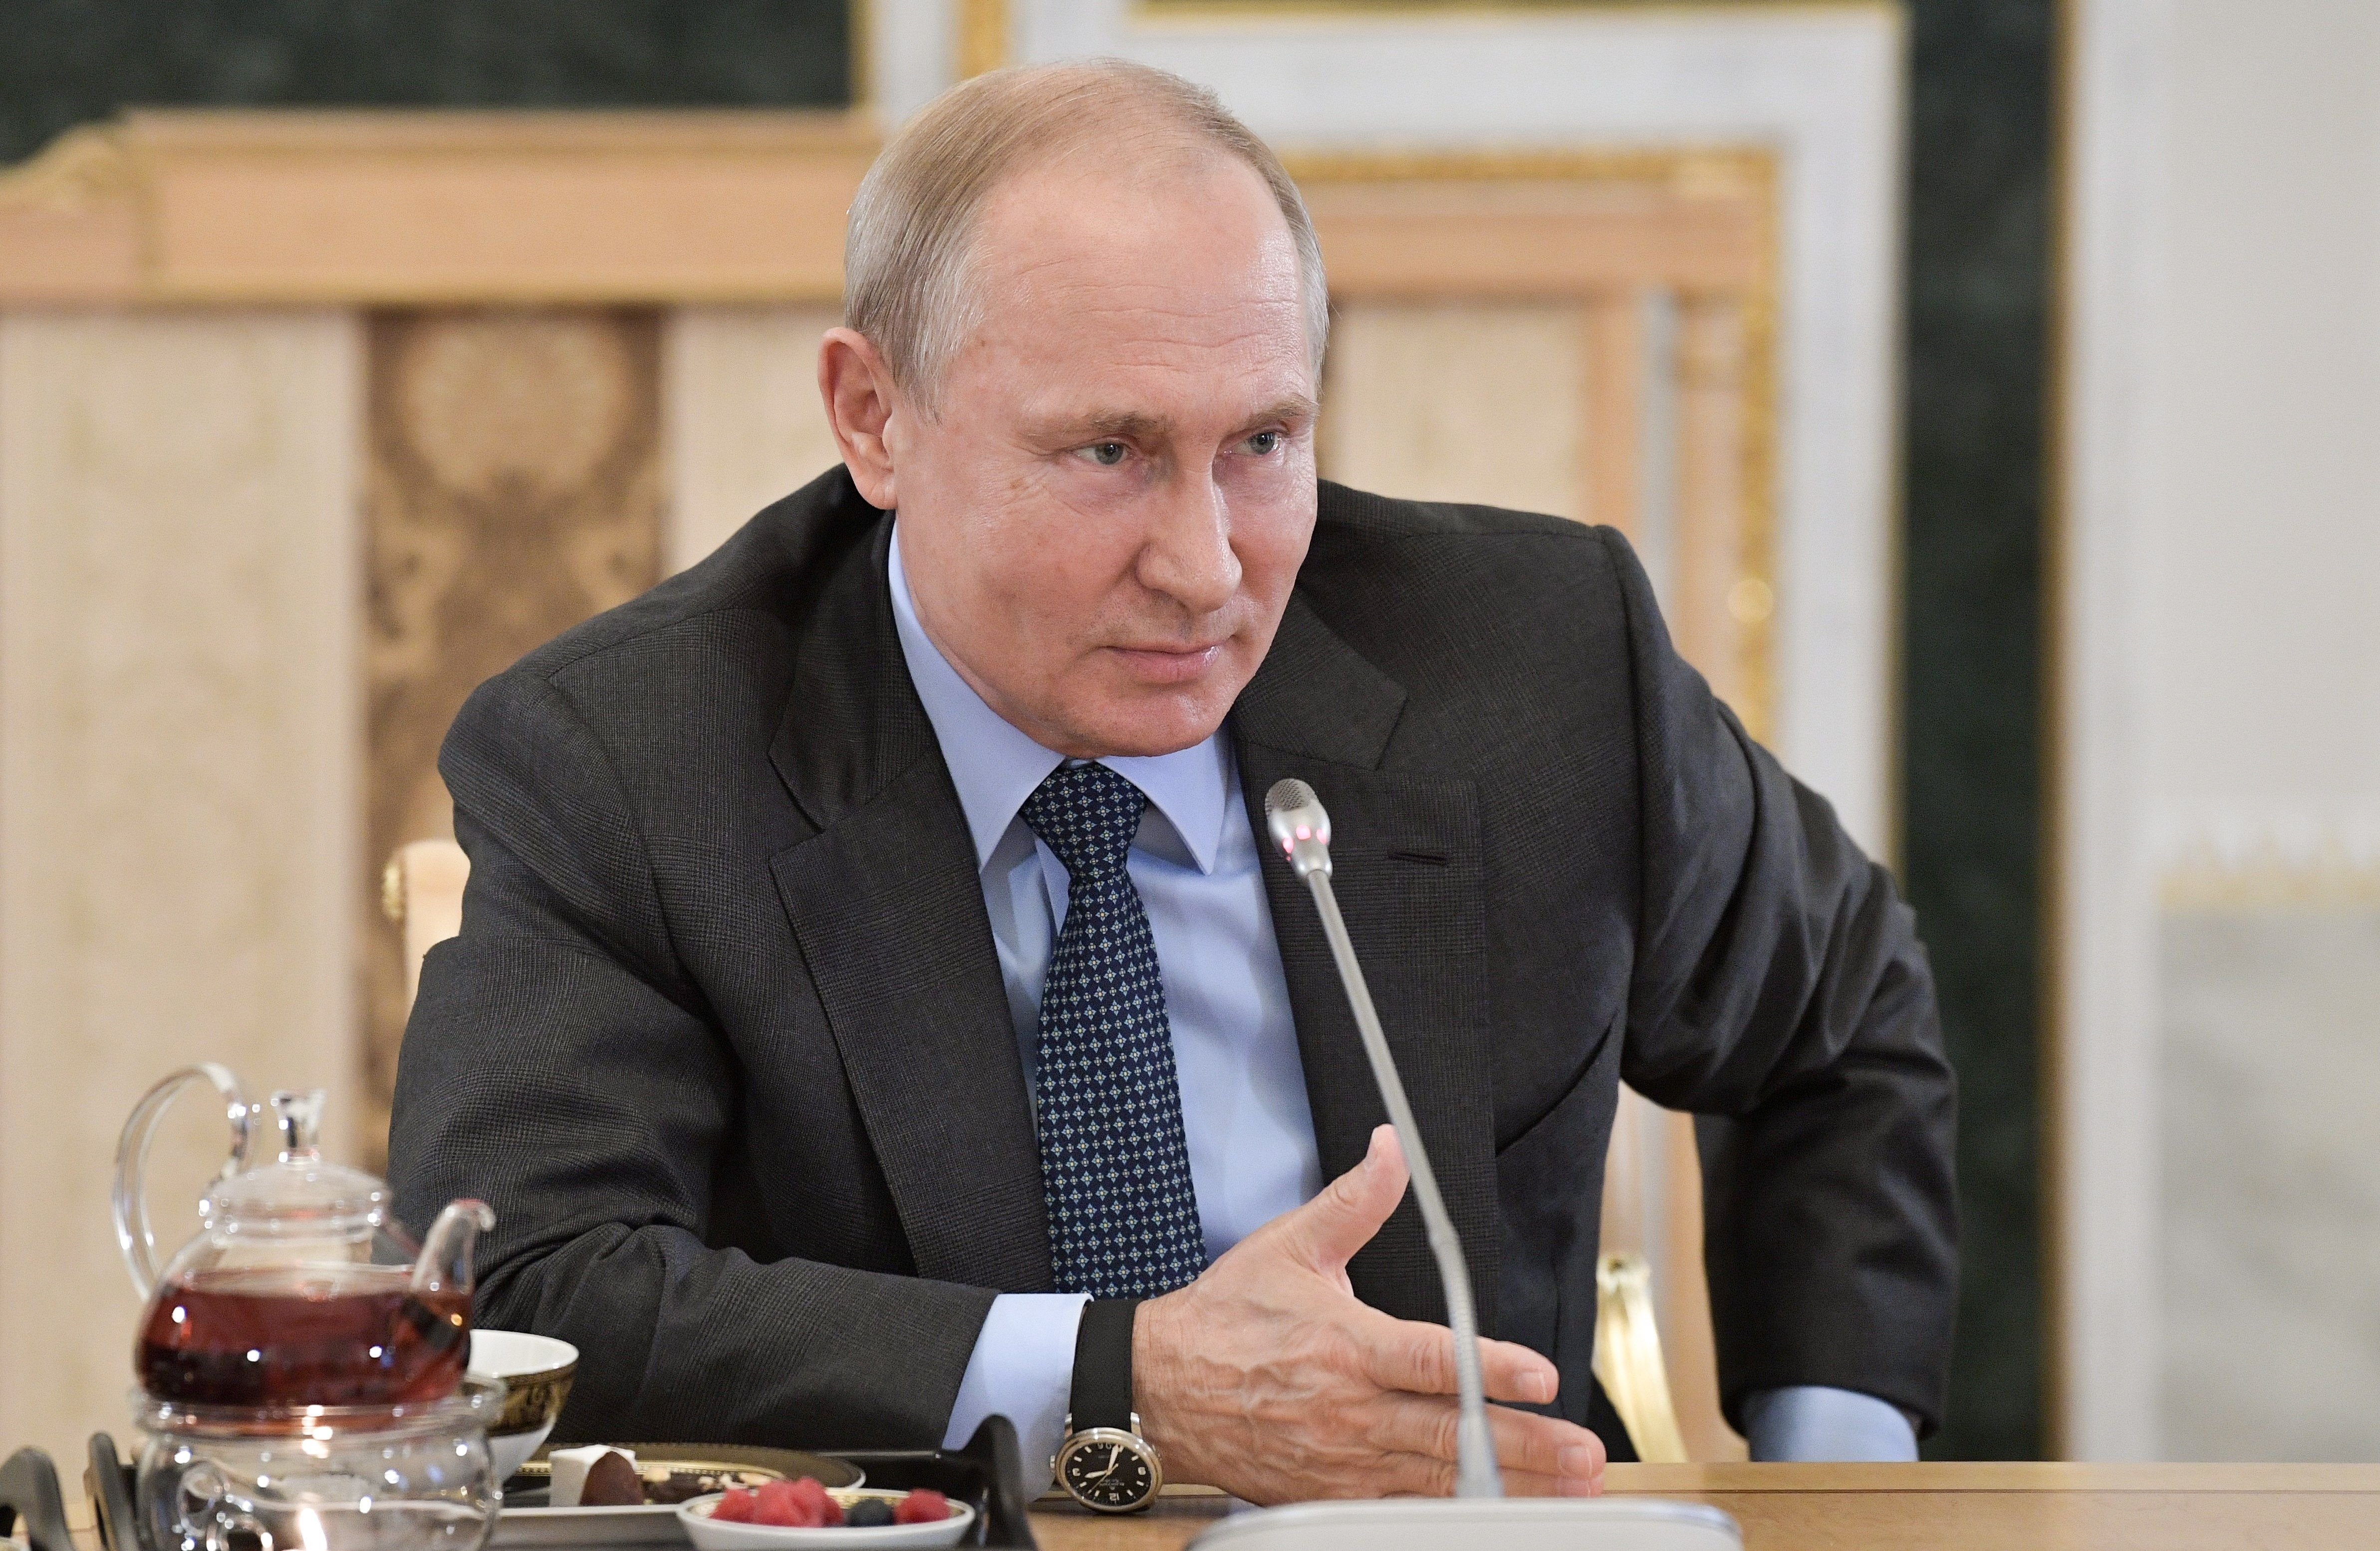 Putin denies supporting Catalan independence: "We don't want any European country to founder"